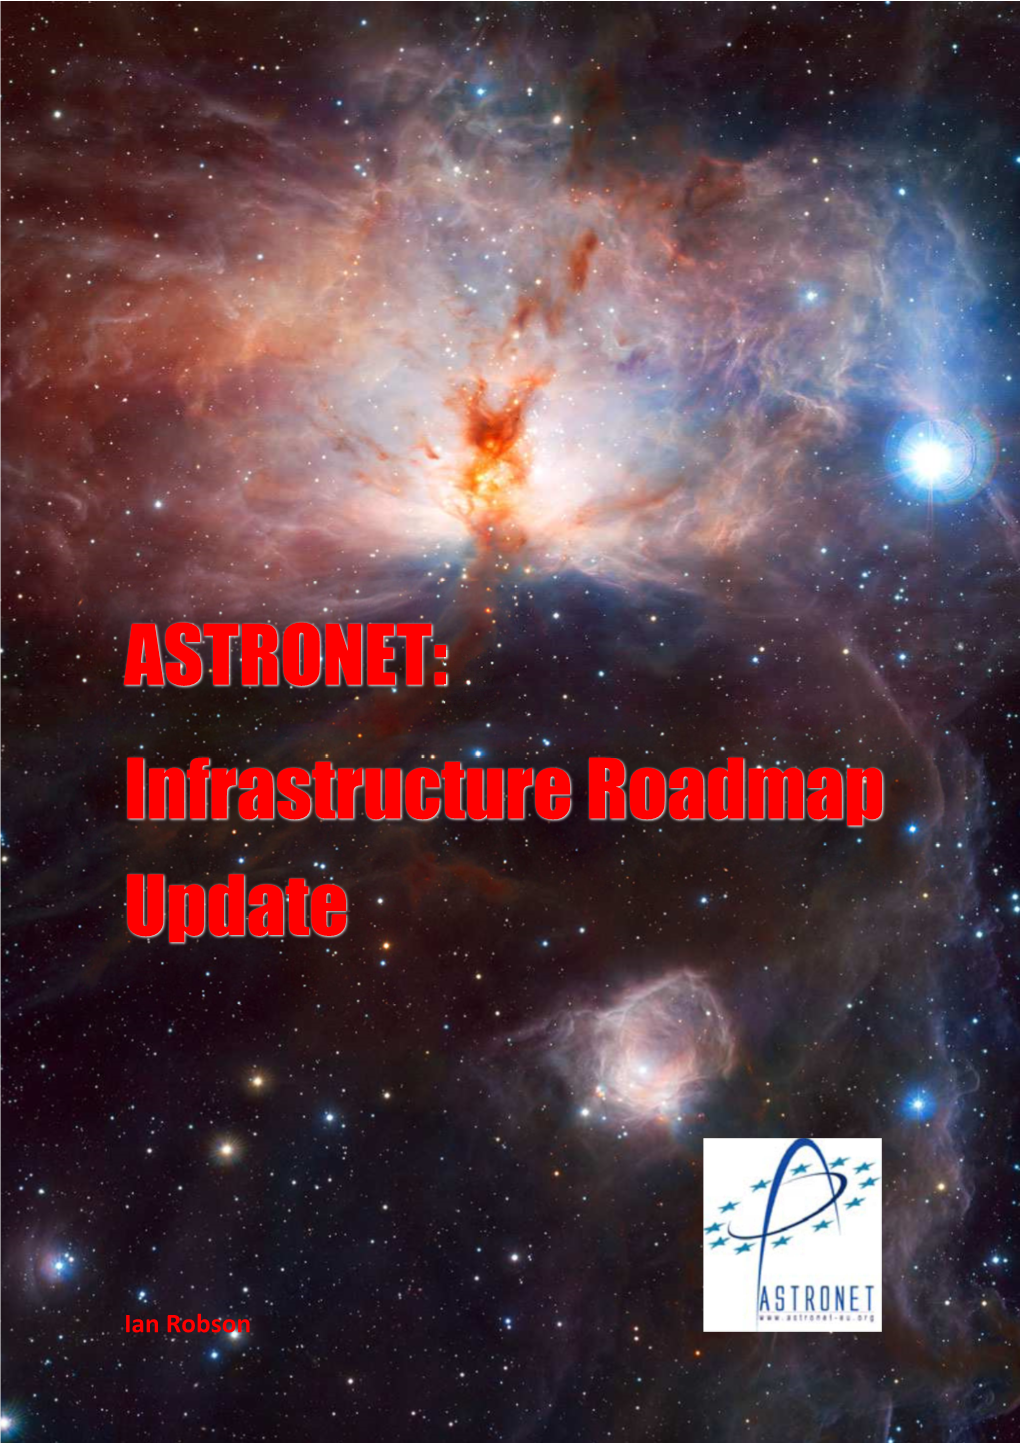 ASTRONET IR Final Word Doc for Printing with Logo